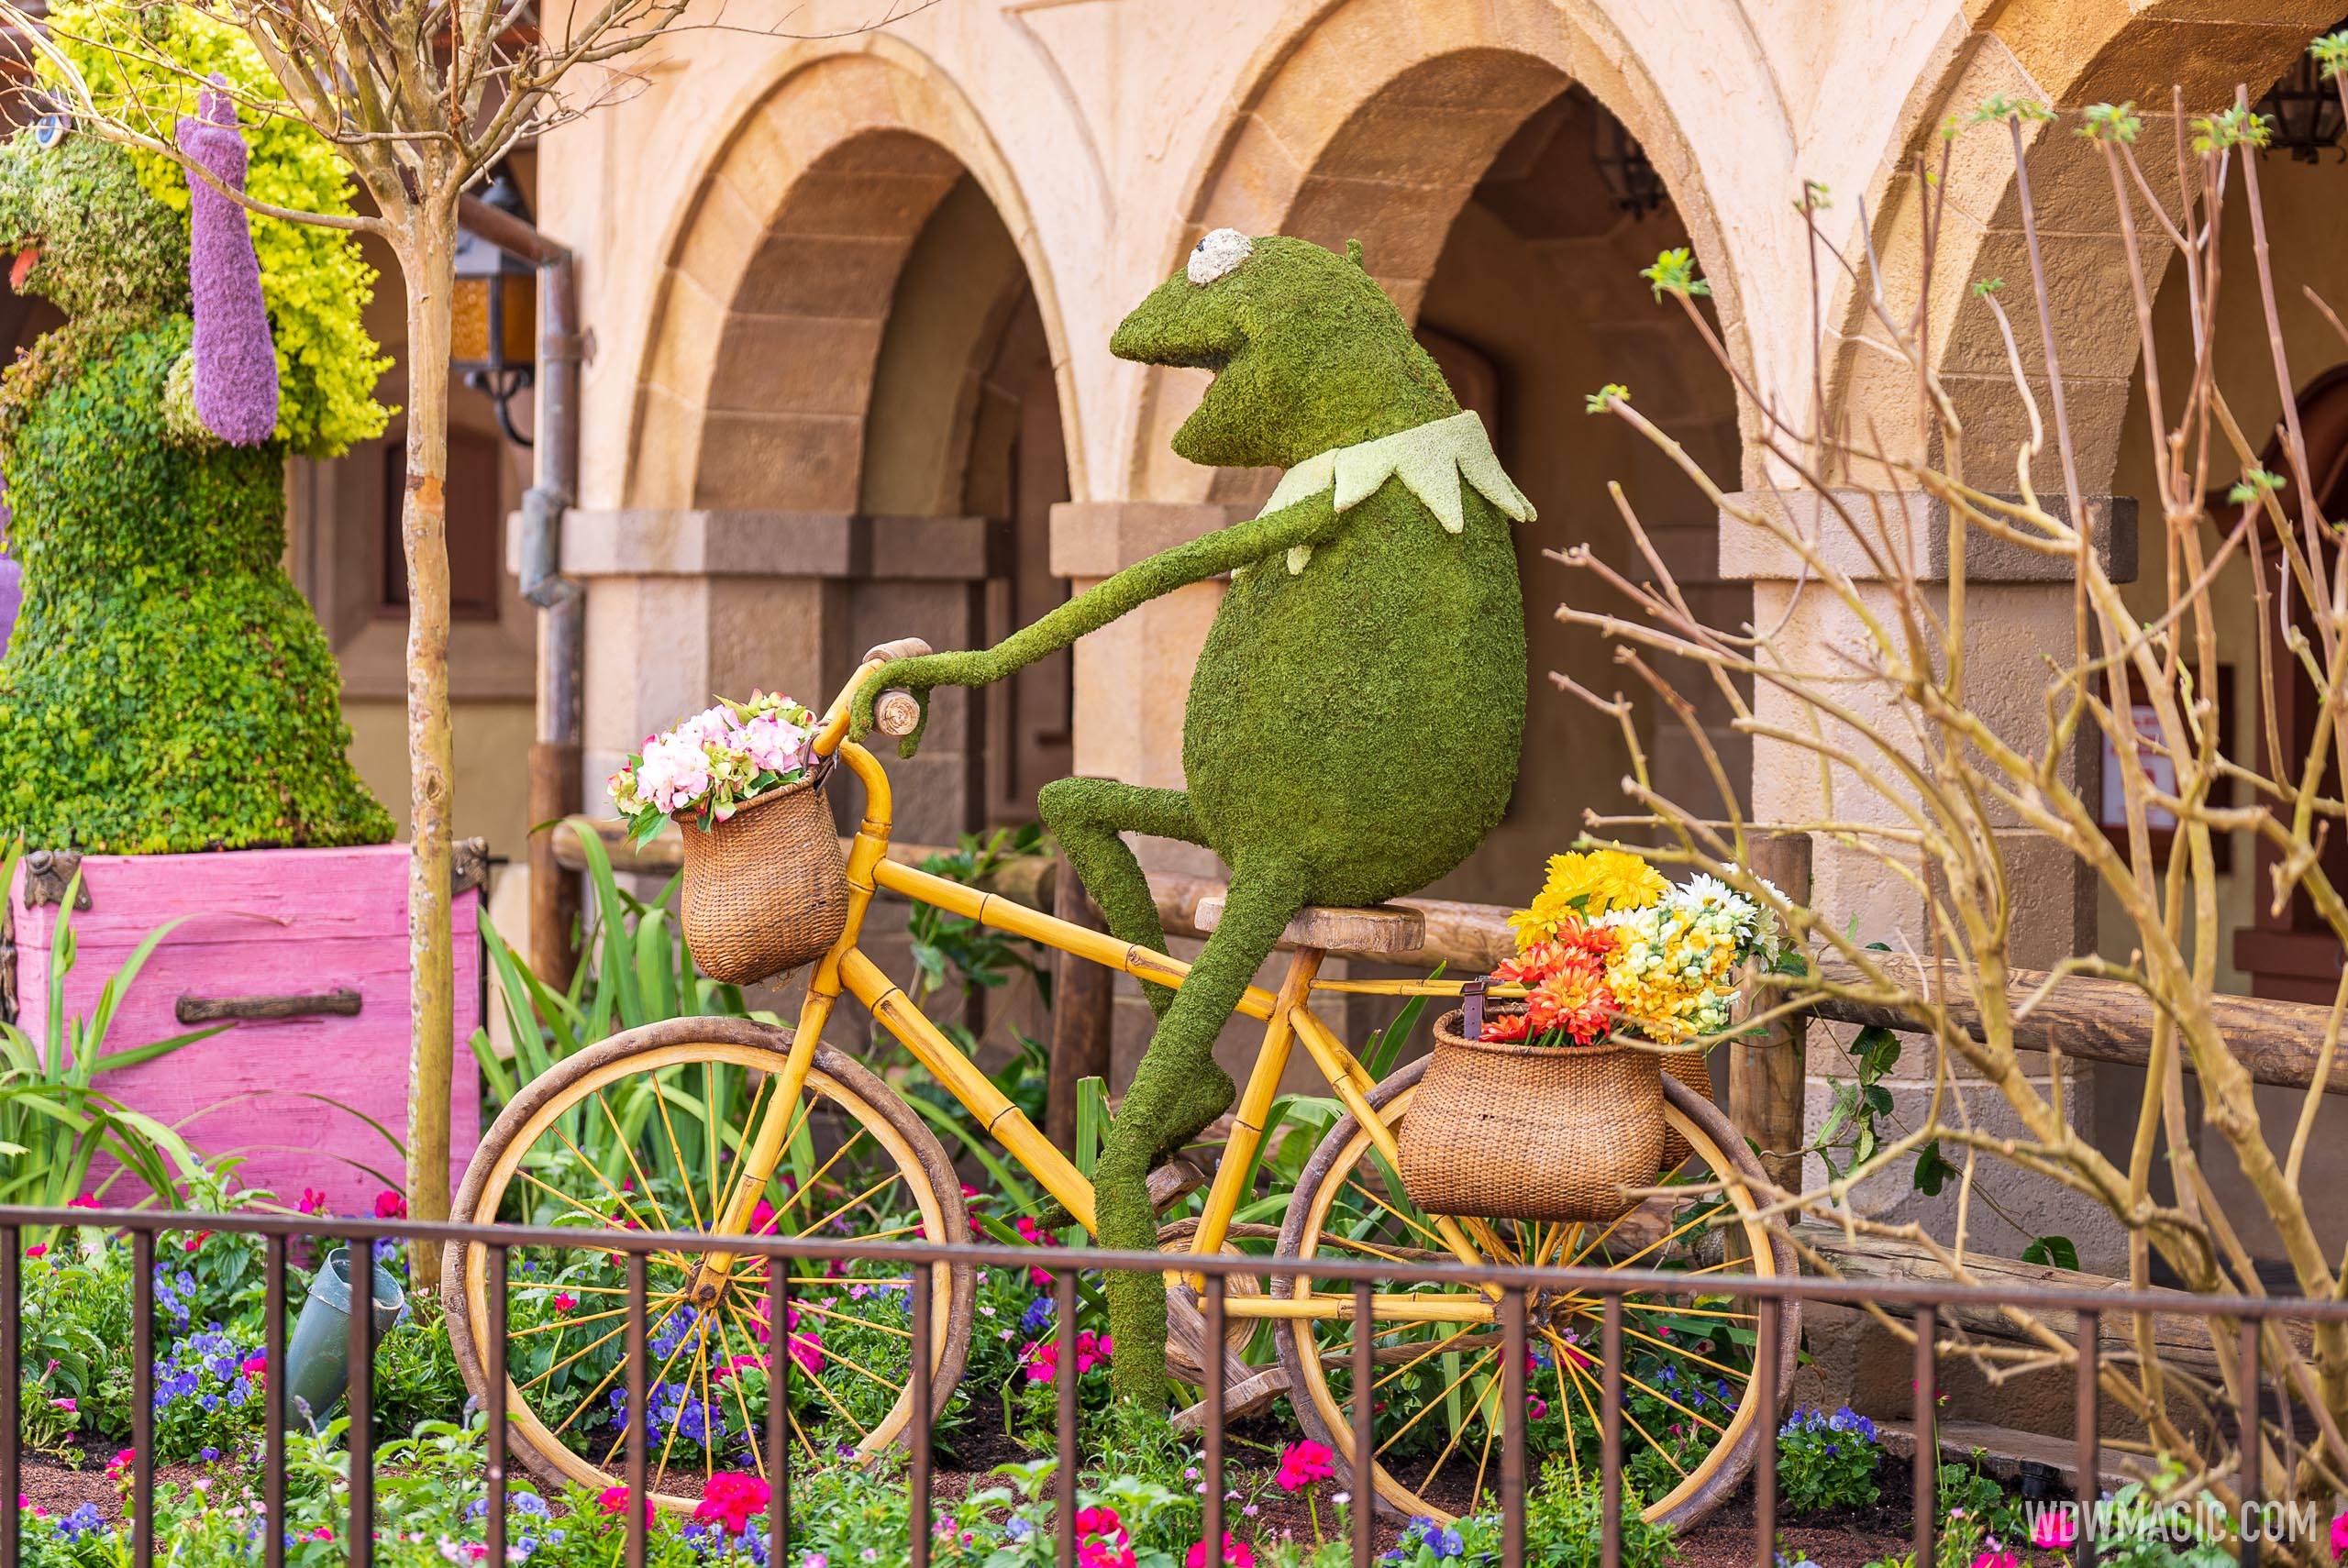 Kermit the Frog and Miss Piggy – Germany Pavilion